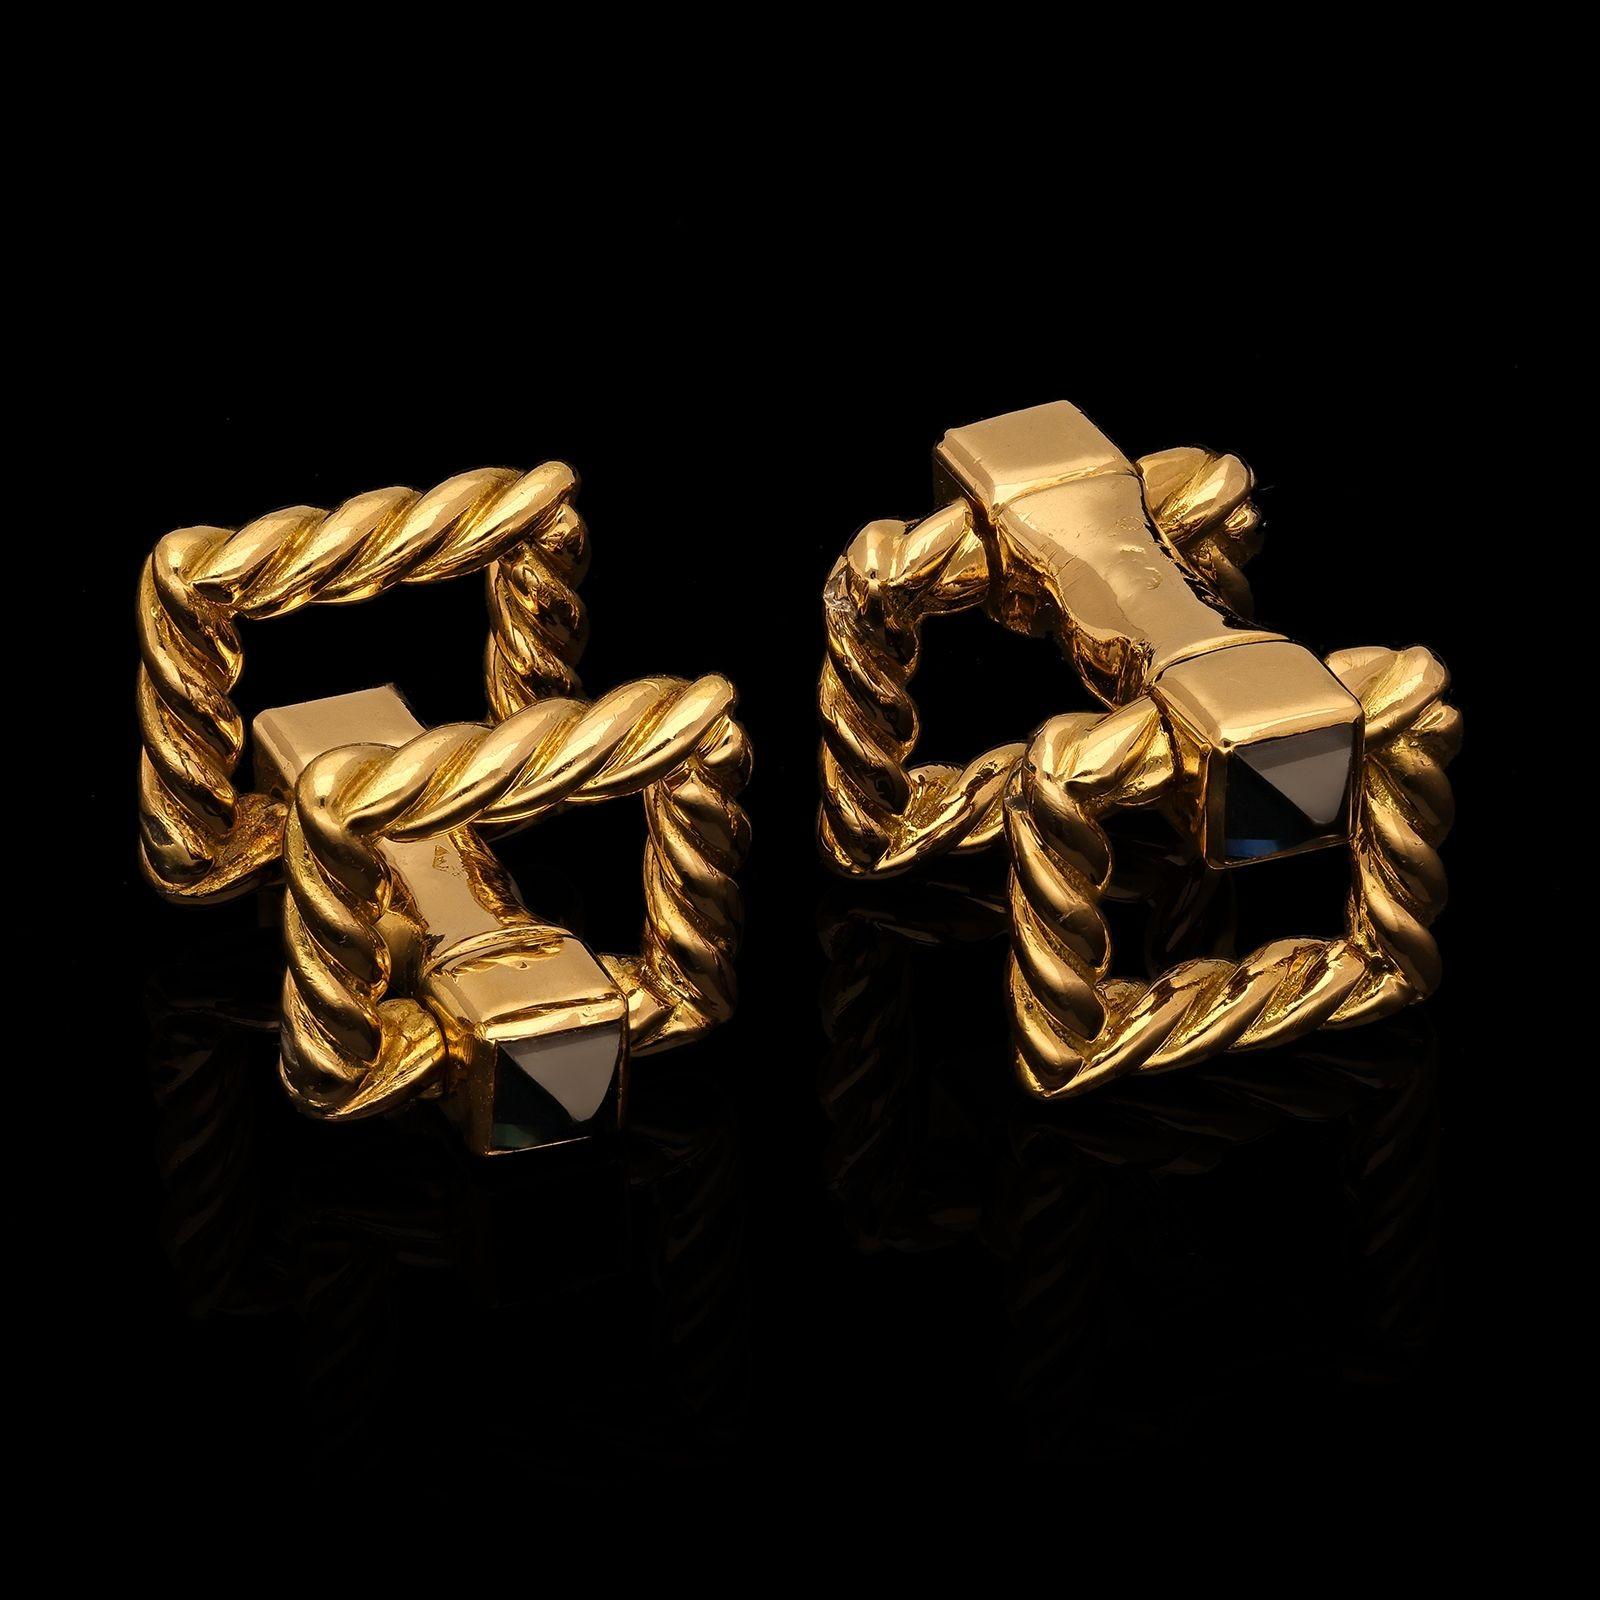 An elegant pair of French 18ct gold cufflinks by Cartier c.1950s, each double ended cufflink formed of a central solid bar terminated each end with a pyramid shaped blue sapphire within an open square shaped motif in rope twisted gold, both ends are